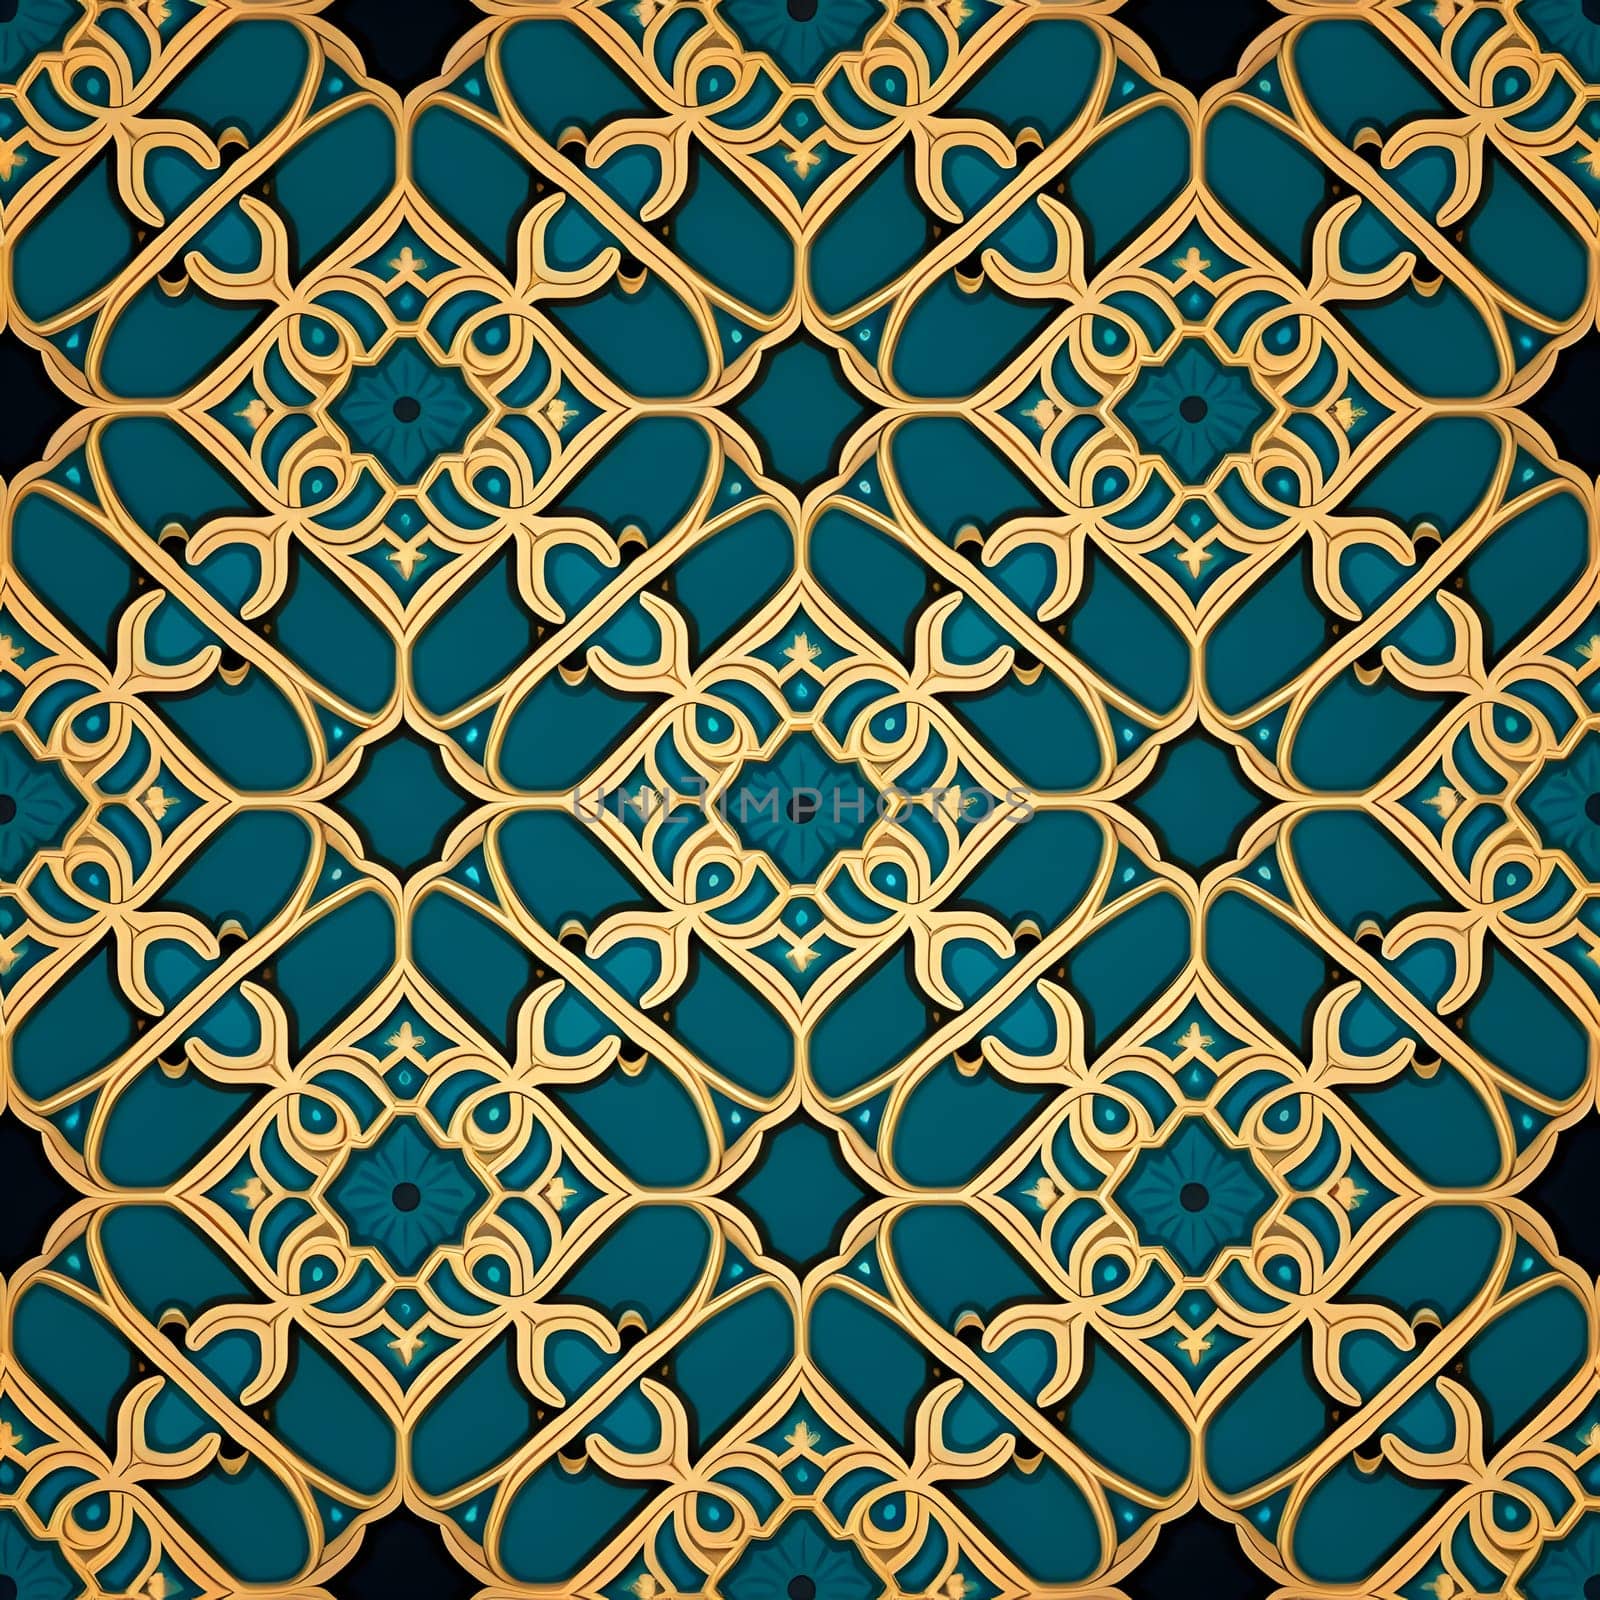 arabic ornament wallpaper and texture, neural network generated art. Digitally generated image. Not based on any actual person, scene or pattern.